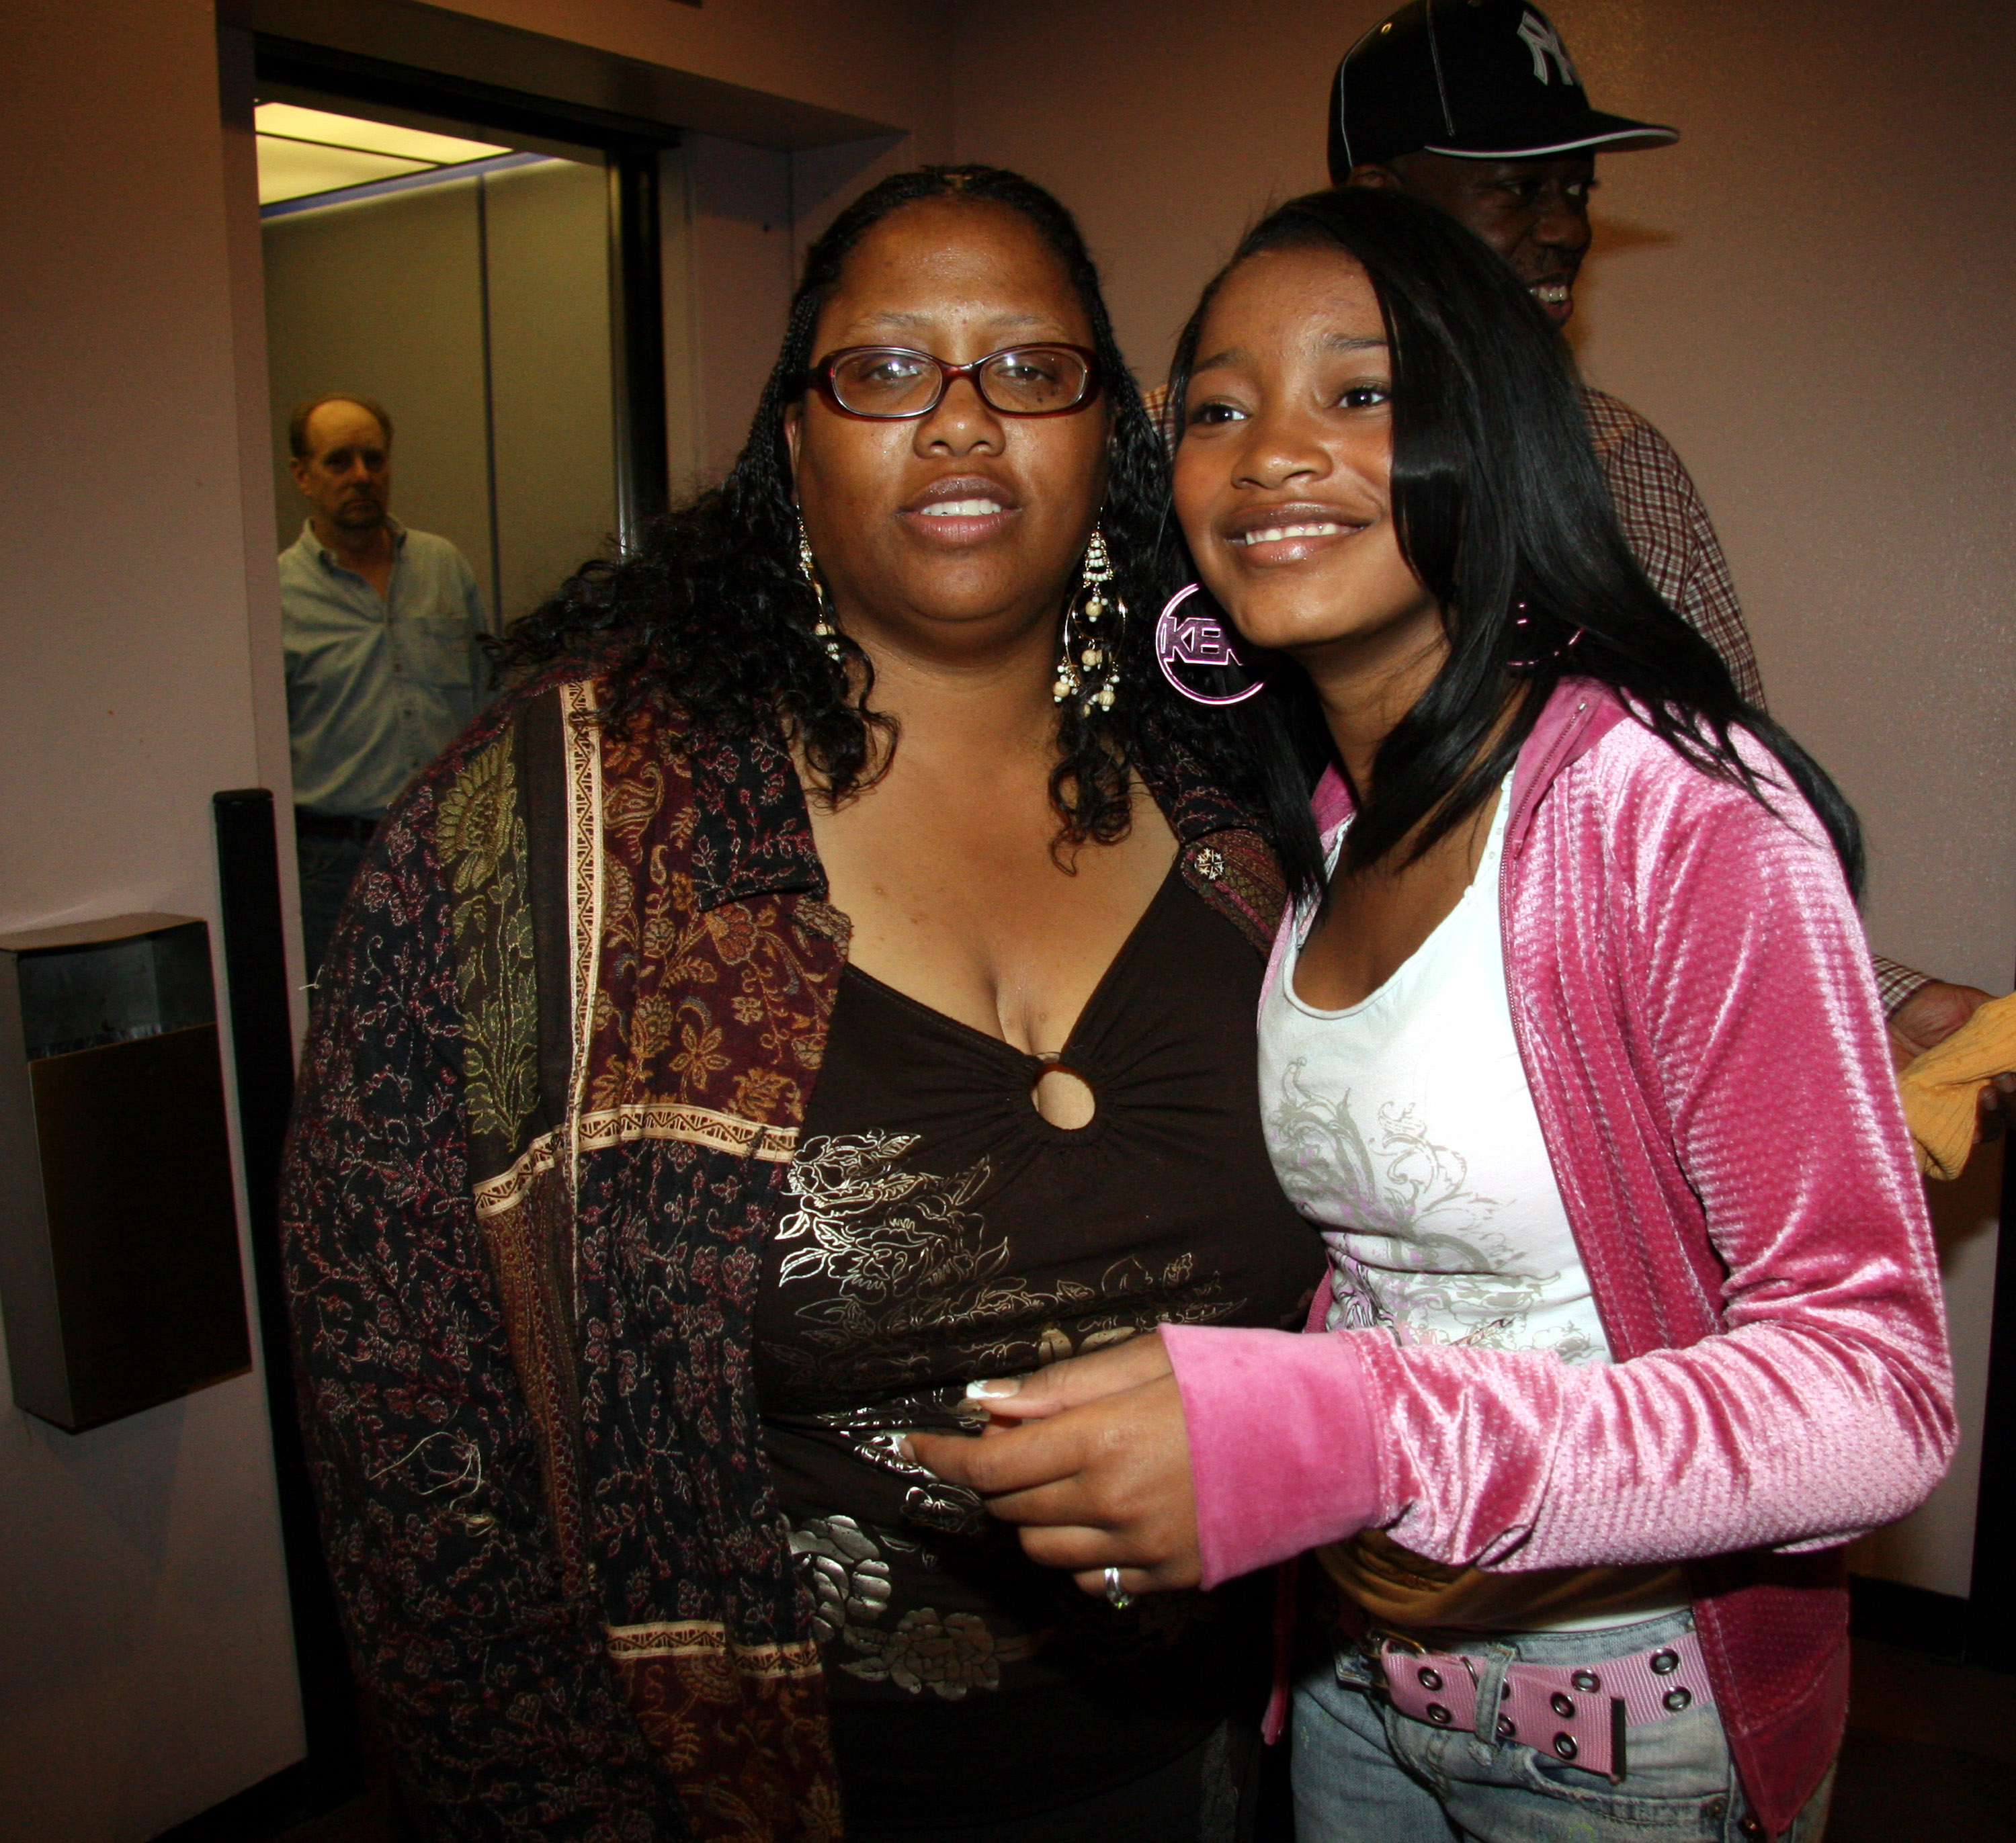 Sharon Palmer and Keke Palmer in New York, New York on April 27, 2006. | Source: Getty Images